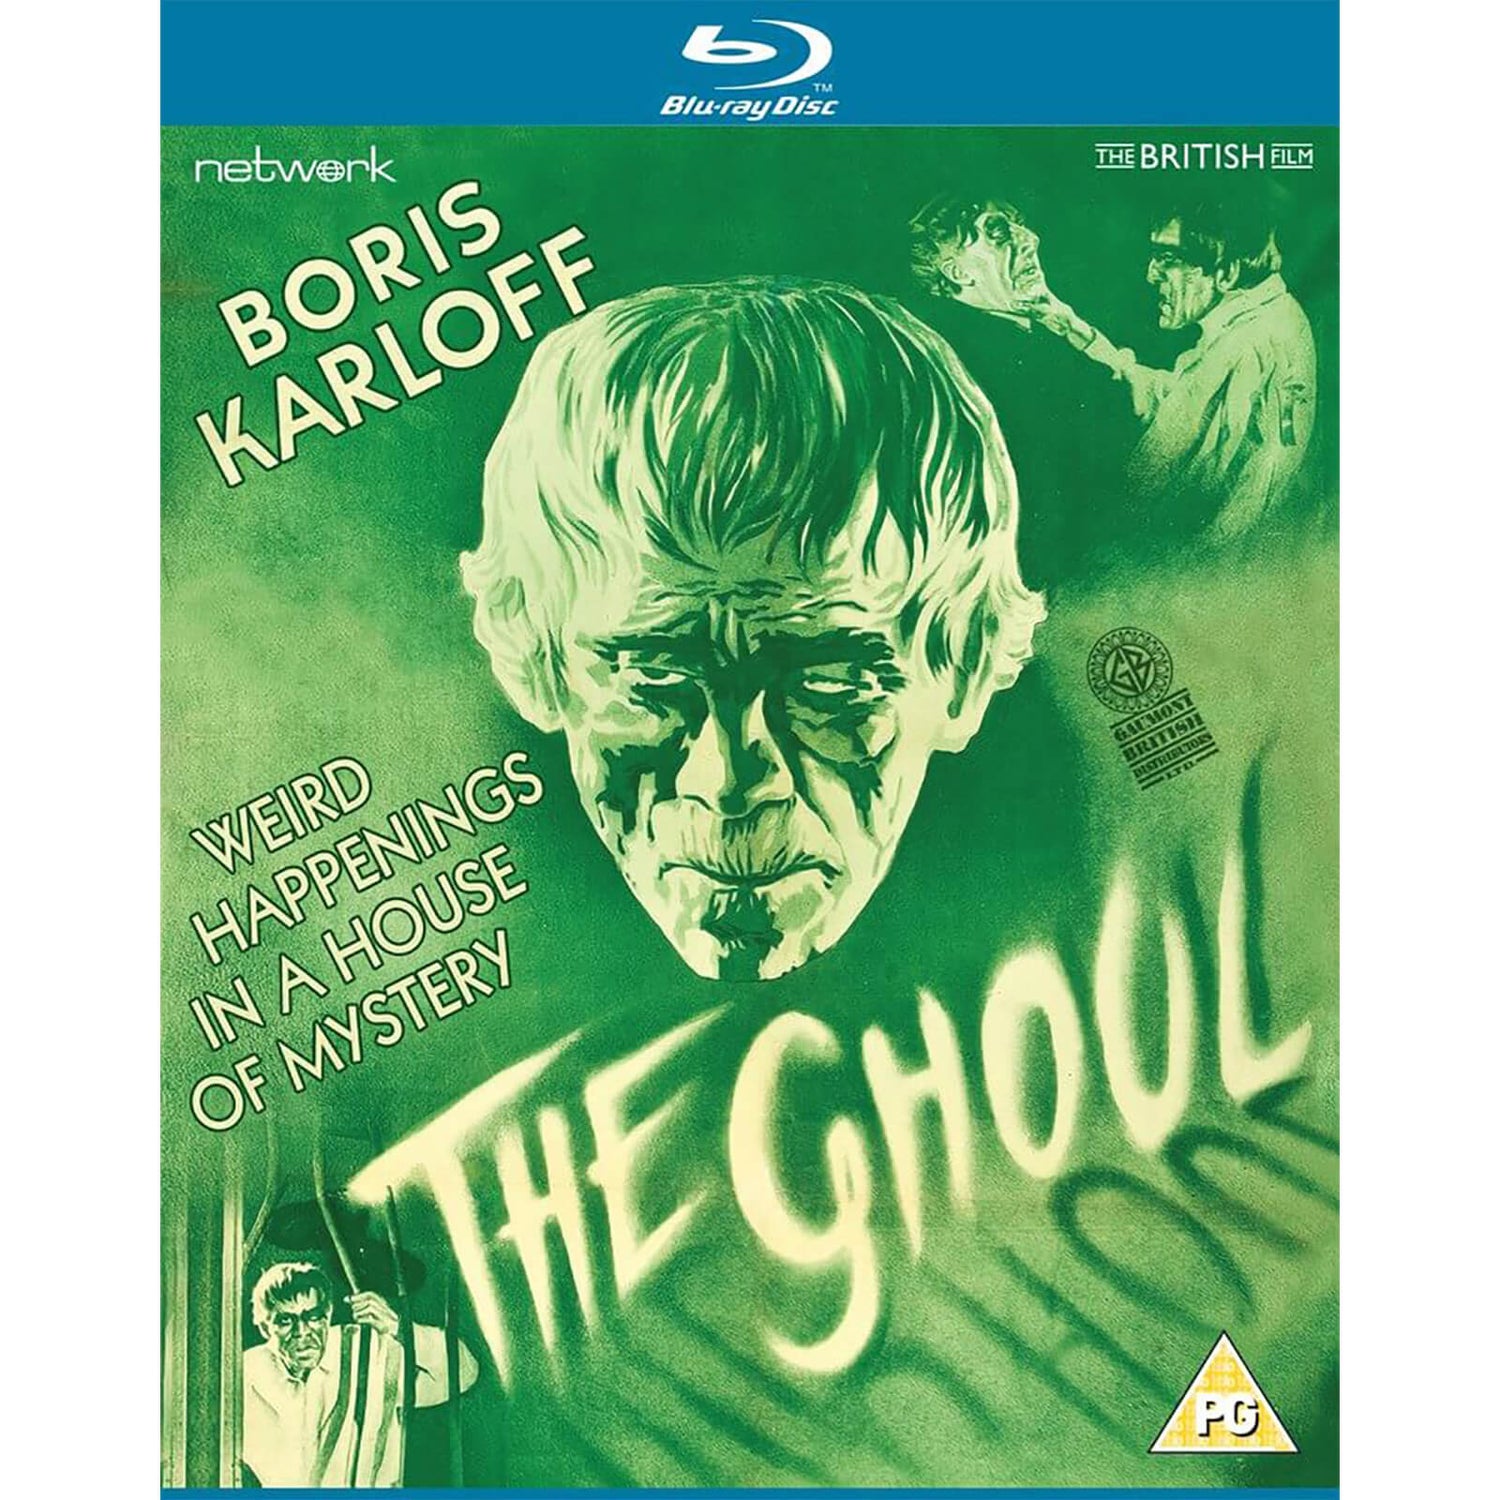 The Ghoul Blu-ray